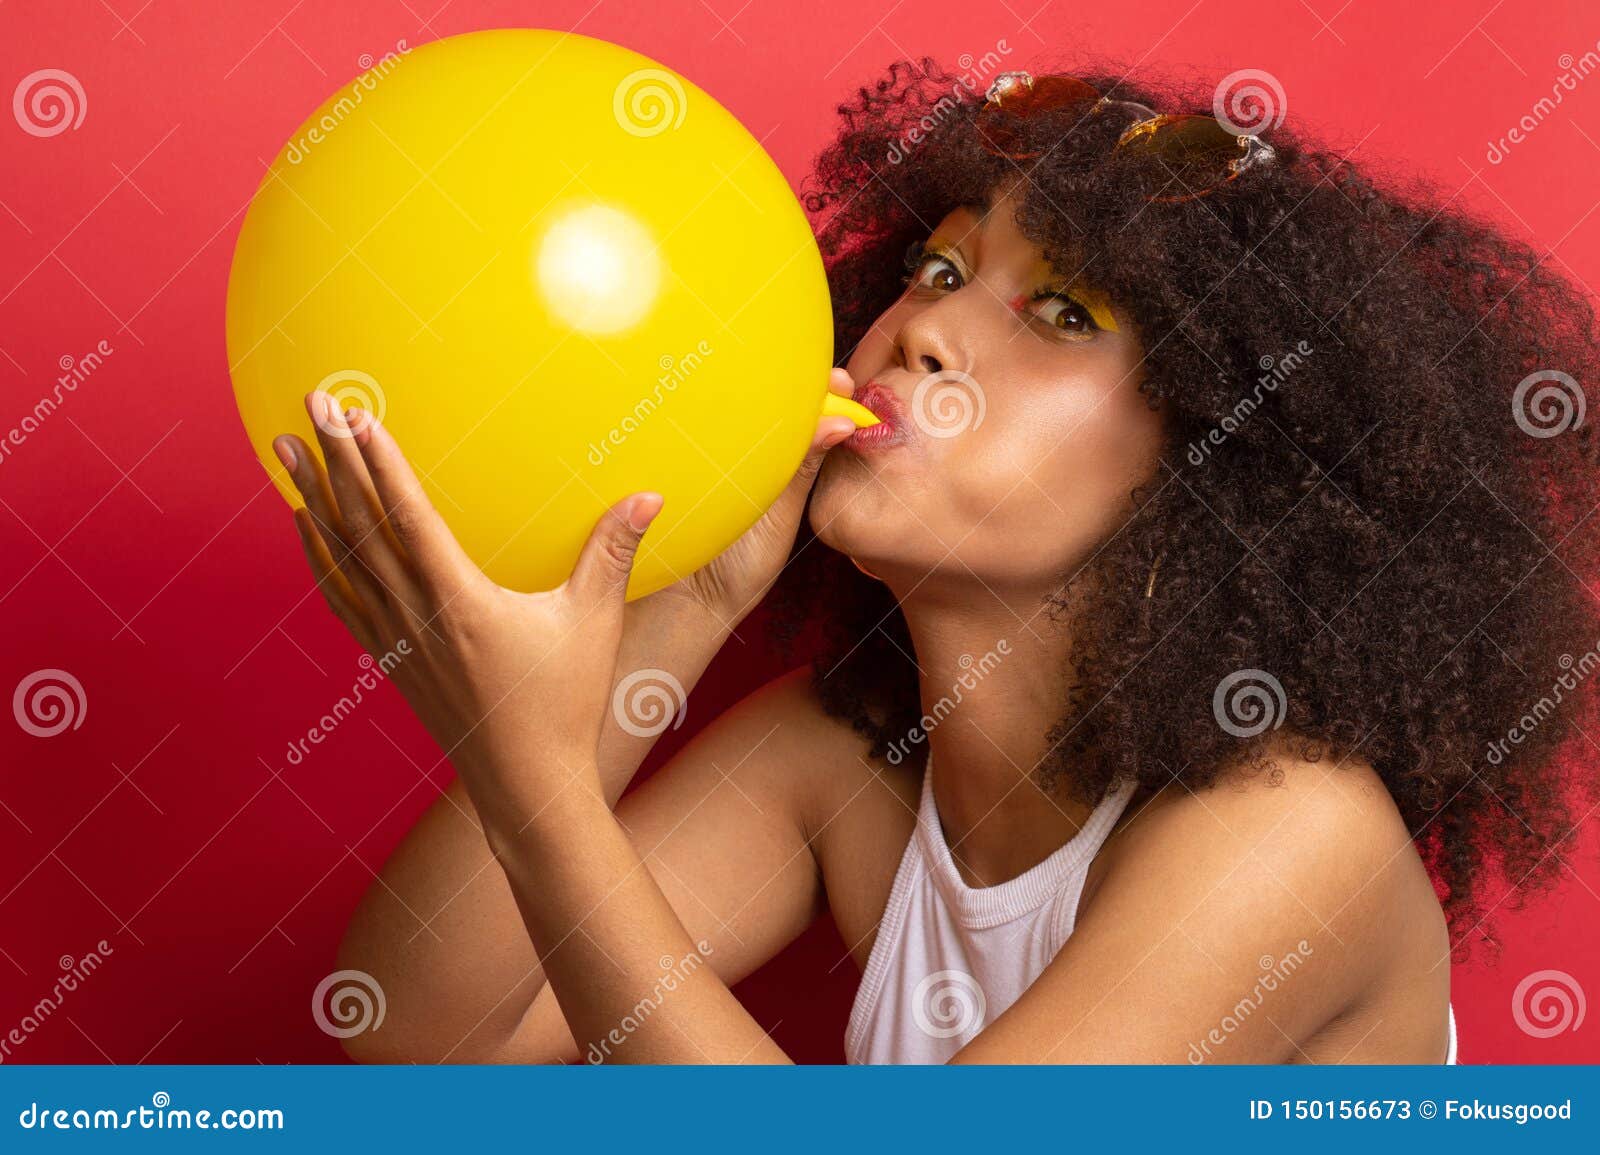 Model with a Lush Hairstyle Inflates a Balloon Stock Image - Image of  enjoyment, background: 150156673